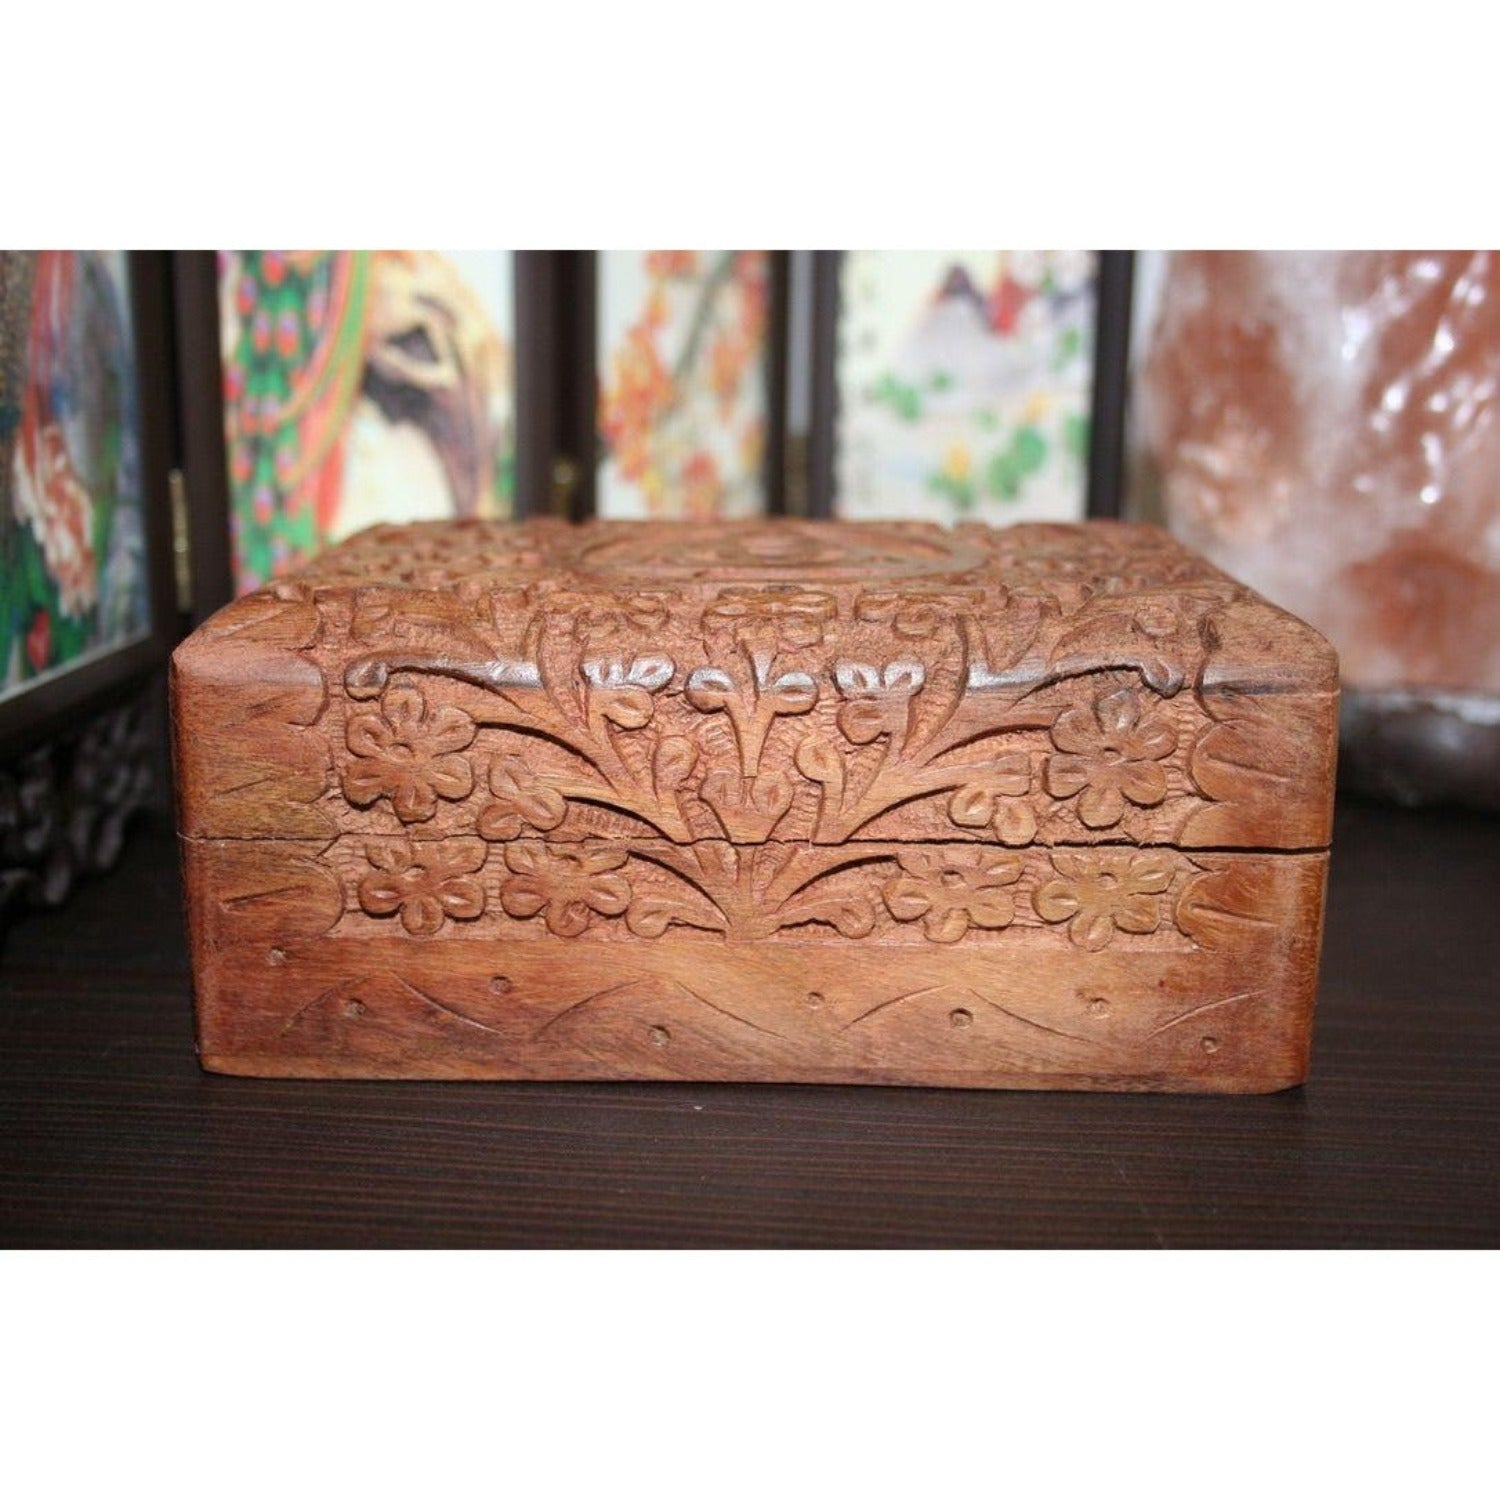 Triquetra Carved Wood Box 4x6"